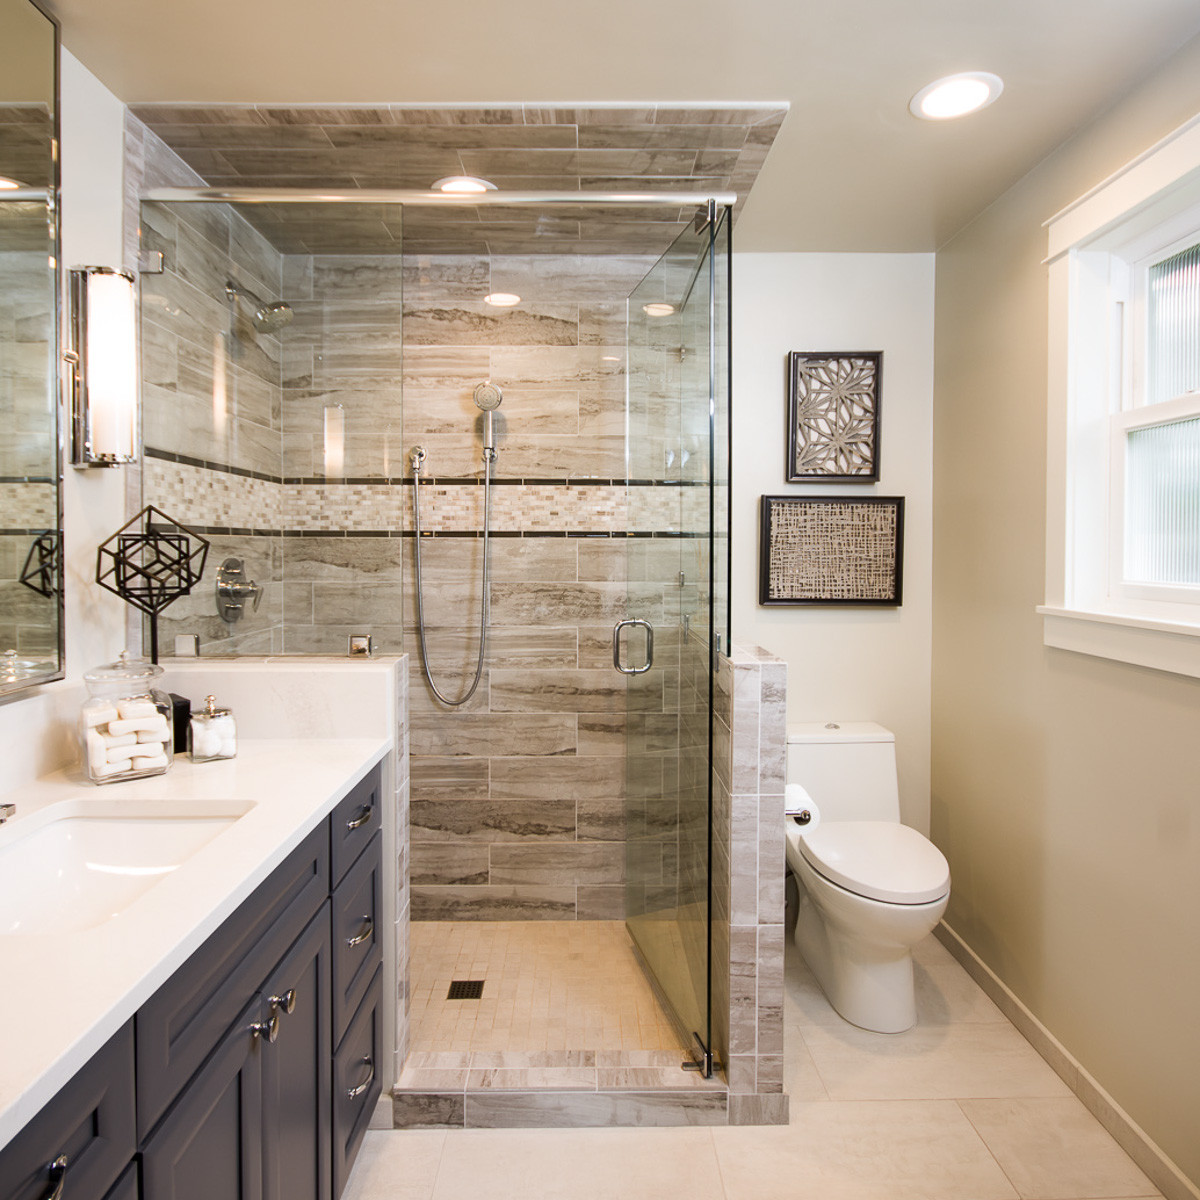 Small Master Bathroom Layout
 Luxurious and Spacious Master Bathroom on a small